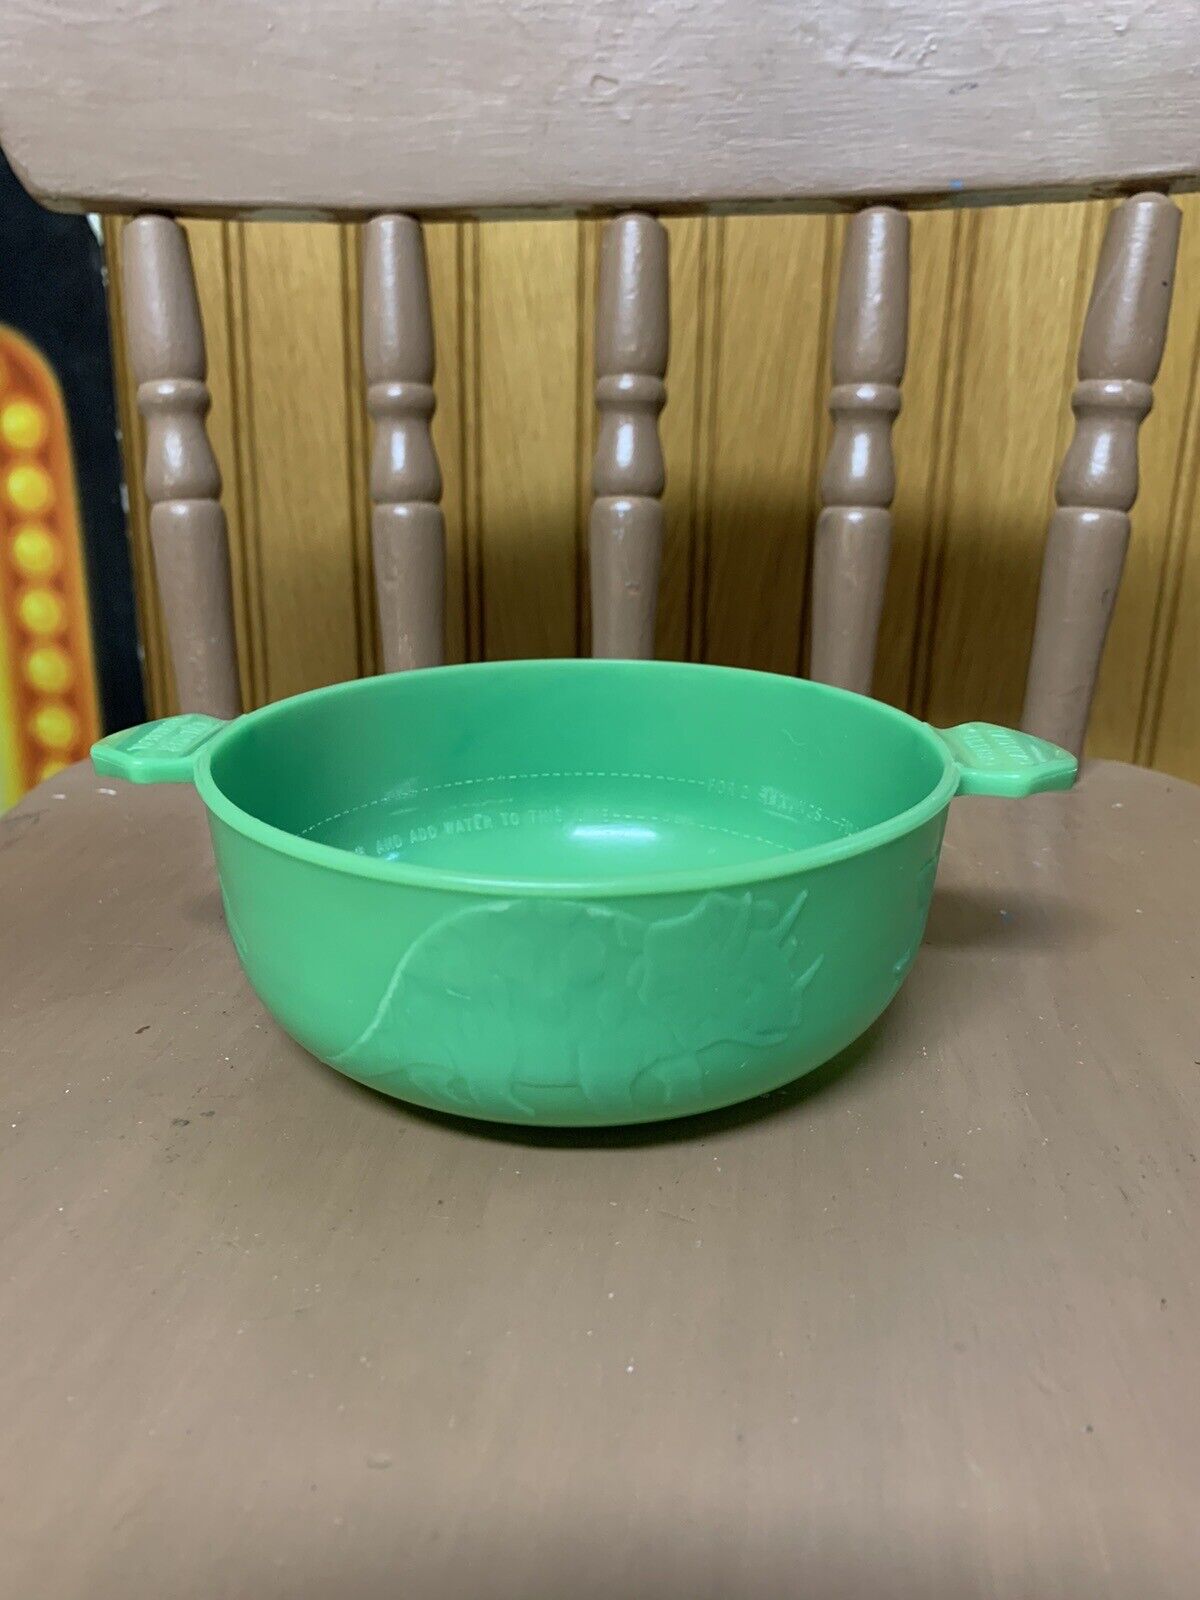 Vintage 1998 Quaker Instant Oatmeal Dinosaur Eggs Color Changing Bowl Green 90s